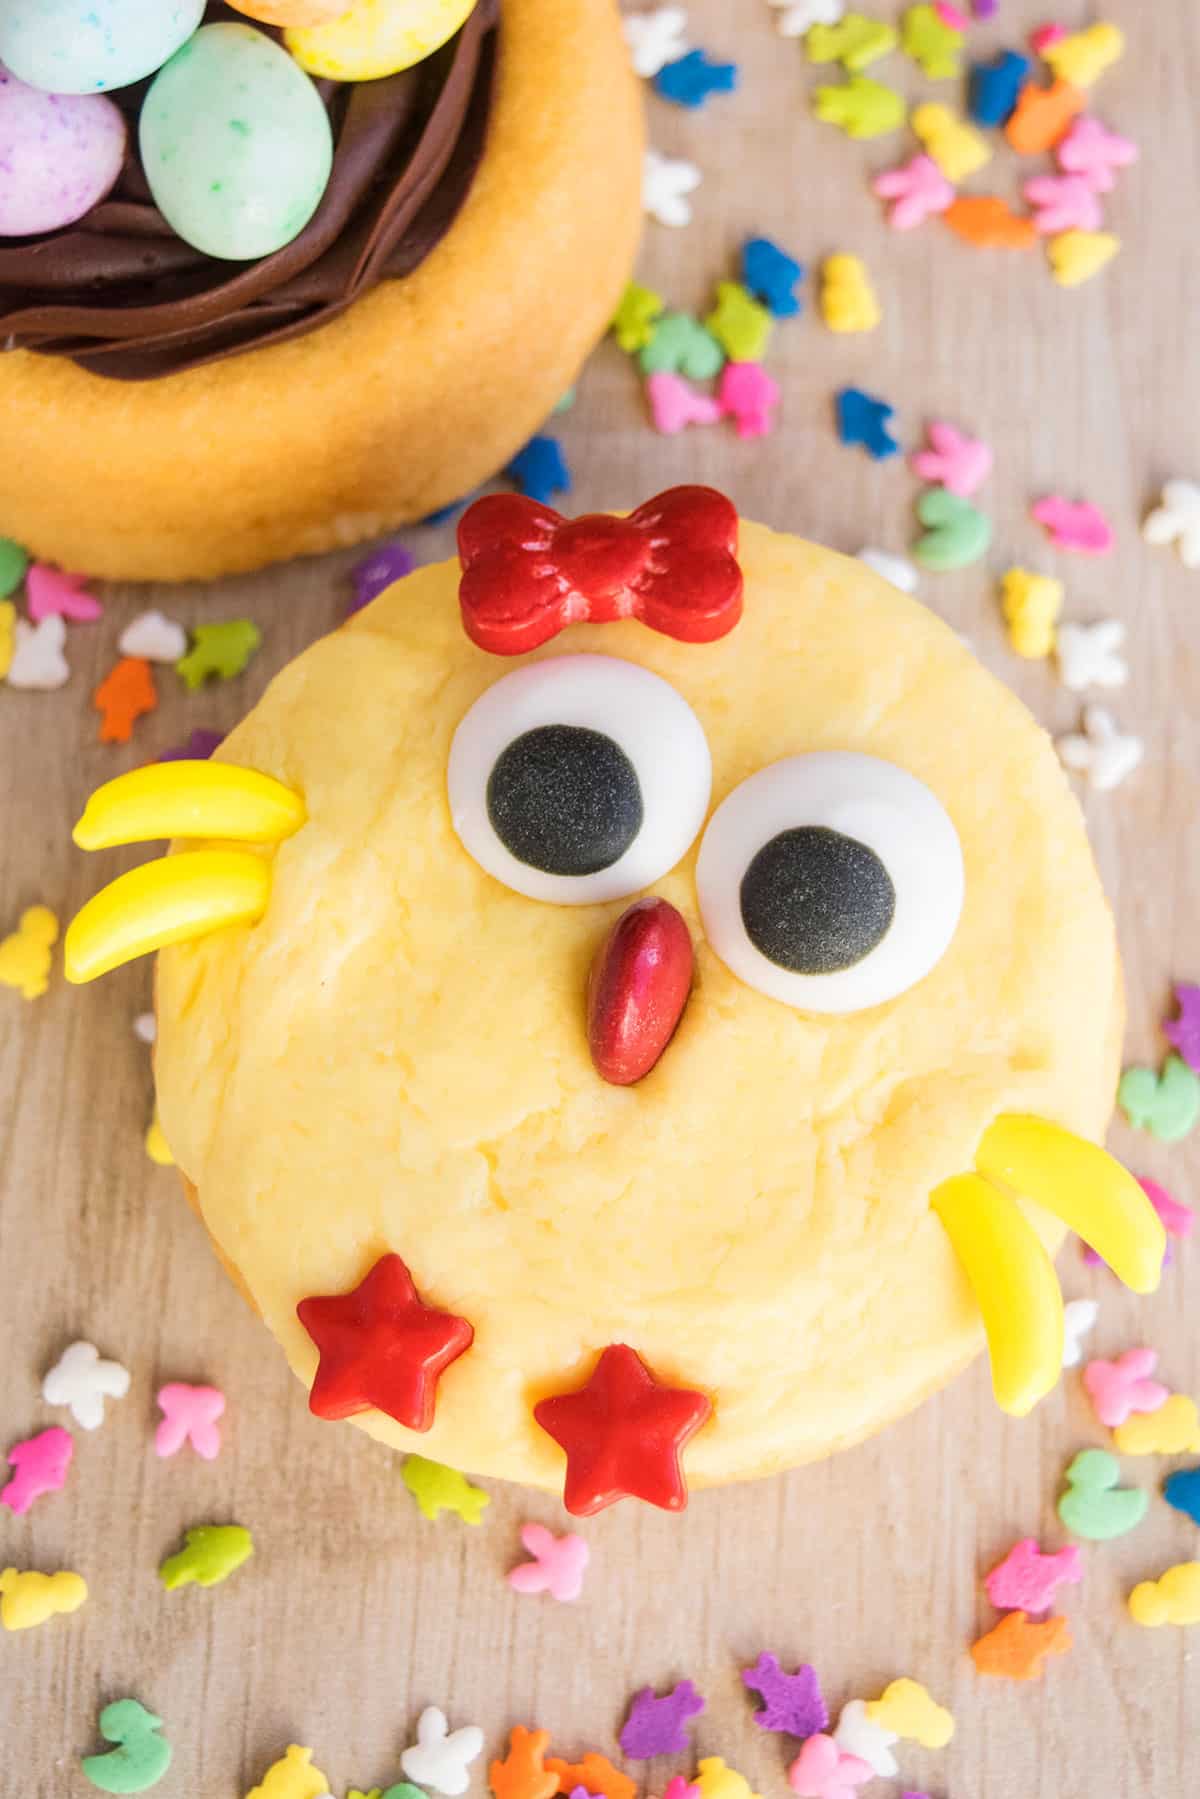 Homemade Easter Chick Cake on Rustic Wood Background.